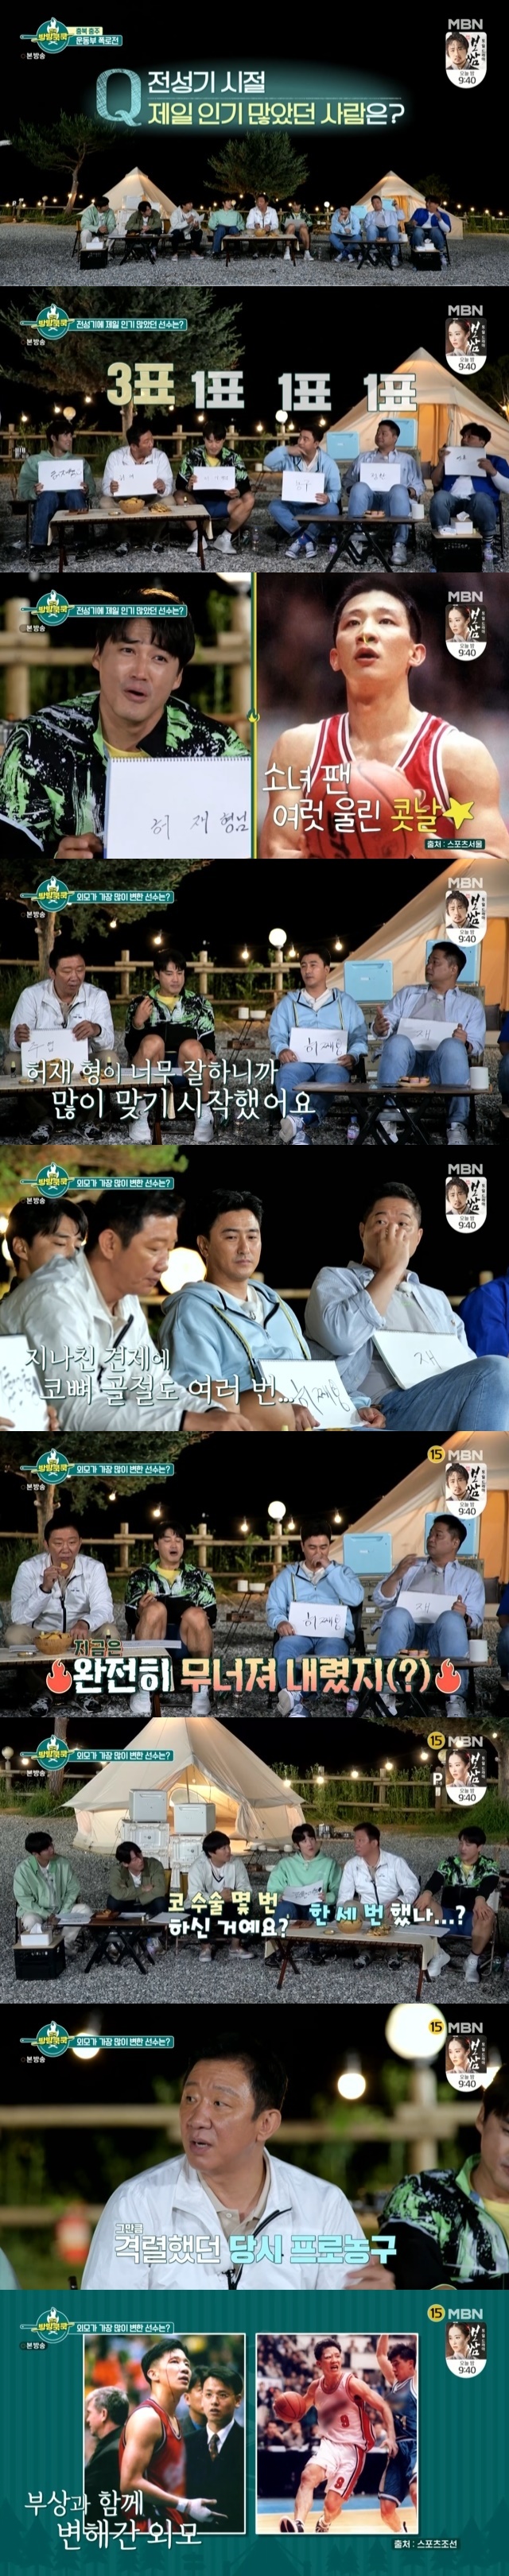 Heo Ung, Heo Hoon The appearance of Hur Jae, who is standing at the center of the topic with the warm appearance of two sons, was mentioned.He also testified that he had lost a lot of his appearance at the time by performing three nose surgeries due to intense basketball Kyonggi.In the 12th MBN entertainment National Cook Cook broadcast on June 26, Hur Jae, Hong Sung-heon, and Park Tae-hwan, who had a mission called An exotic dish to feel the travel feeling, visited the camping site in Chungju, Chungbuk.Three guests Hur Jae, Hong Sung-heon, and Park Tae-hwan, who appeared with enthusiastic cheers on the day, focused their attention on the audience with their uncompromising talks and anecdotes as they were originally close to MCs.In particular, Hur Jae played as a sniper for his junior, Hyun Joo-yup.He laughed when Ahn Jung-hwan said that he usually takes care of the resonance party and gomtang for himself, and that Hyun Joo-yup is nothing, saying that he is the first shooter, Hyun Joo-yup is cute Porco Rosso.Hur Jae said that Hyun Joo-yup had a more appearance than he was during his career, saying, It changed from the son of a bitch, Poco Rosso to the mother, Poco Rosso.But the Hyun Joo-yup also stood up formidably.Hur Jae was also a tough player, said Hyun Joo-yup. Before Hur Jae was thirty, his nose was stiff, sharp and handsome, but he was so good at basketball (in basketball) that he was very good at Kyonggi.The nose is now completely collapsed and the neighborhood uncle is Asked how many times he had nose surgery, Hur Jae replied, Three times, and responded numbly, It was sharp in the old days, it was a chicken, but it became a chicken.Still, Hur Jae himself was proud of his popularity during his prime.Hur Jae was proud of himself as the most popular person in his prime among the six sportsmen who combined Ahn Jung-hwan, Kim Tae-gyun and Hyun Joo-yup on the day, I was the most popular in the domestic wave.Cha Tae-hyun proved the popularity of Hur Jae at the time, saying, Was not the bishop the first brother unit?Hong Sung-heonn also said, At that time, I saw the nose of Hur Jae and I was attracted to it. When the girls saw the nose and married this person, I would not starve to death.I have a nose, he admitted actively.In the meantime, Hyun Joo-yup attracted attention by pointing out Hur Jae as just a woven person.With the playful side that he teased all along, Hyun Joo-yup said, Its like a local brother, now a fool image, but not originally a brother, a charismatic and highly respected brother.I have a lot of sacrifices for basketball, even though it is for broadcasting. It is a good and respectful thing to go to a stupid image.